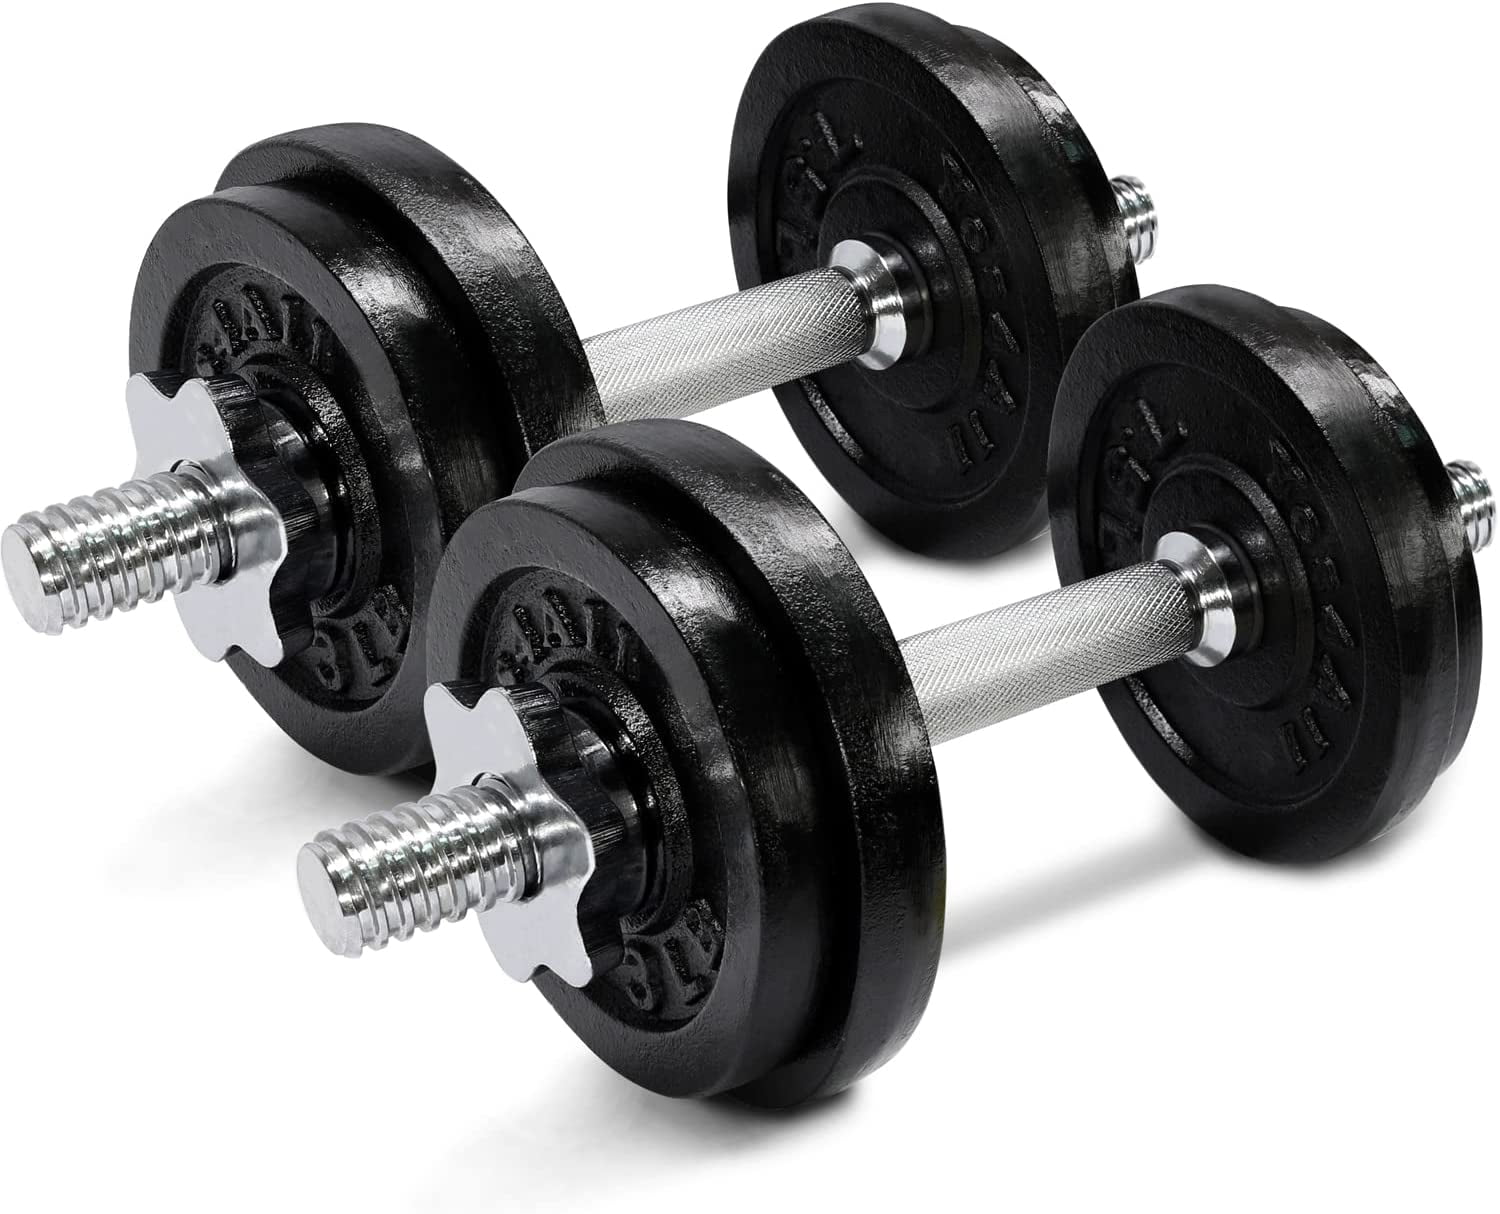 Four 5lb Standard 1.15" Yes4All Weight Plates 20 Pounds Total 4 